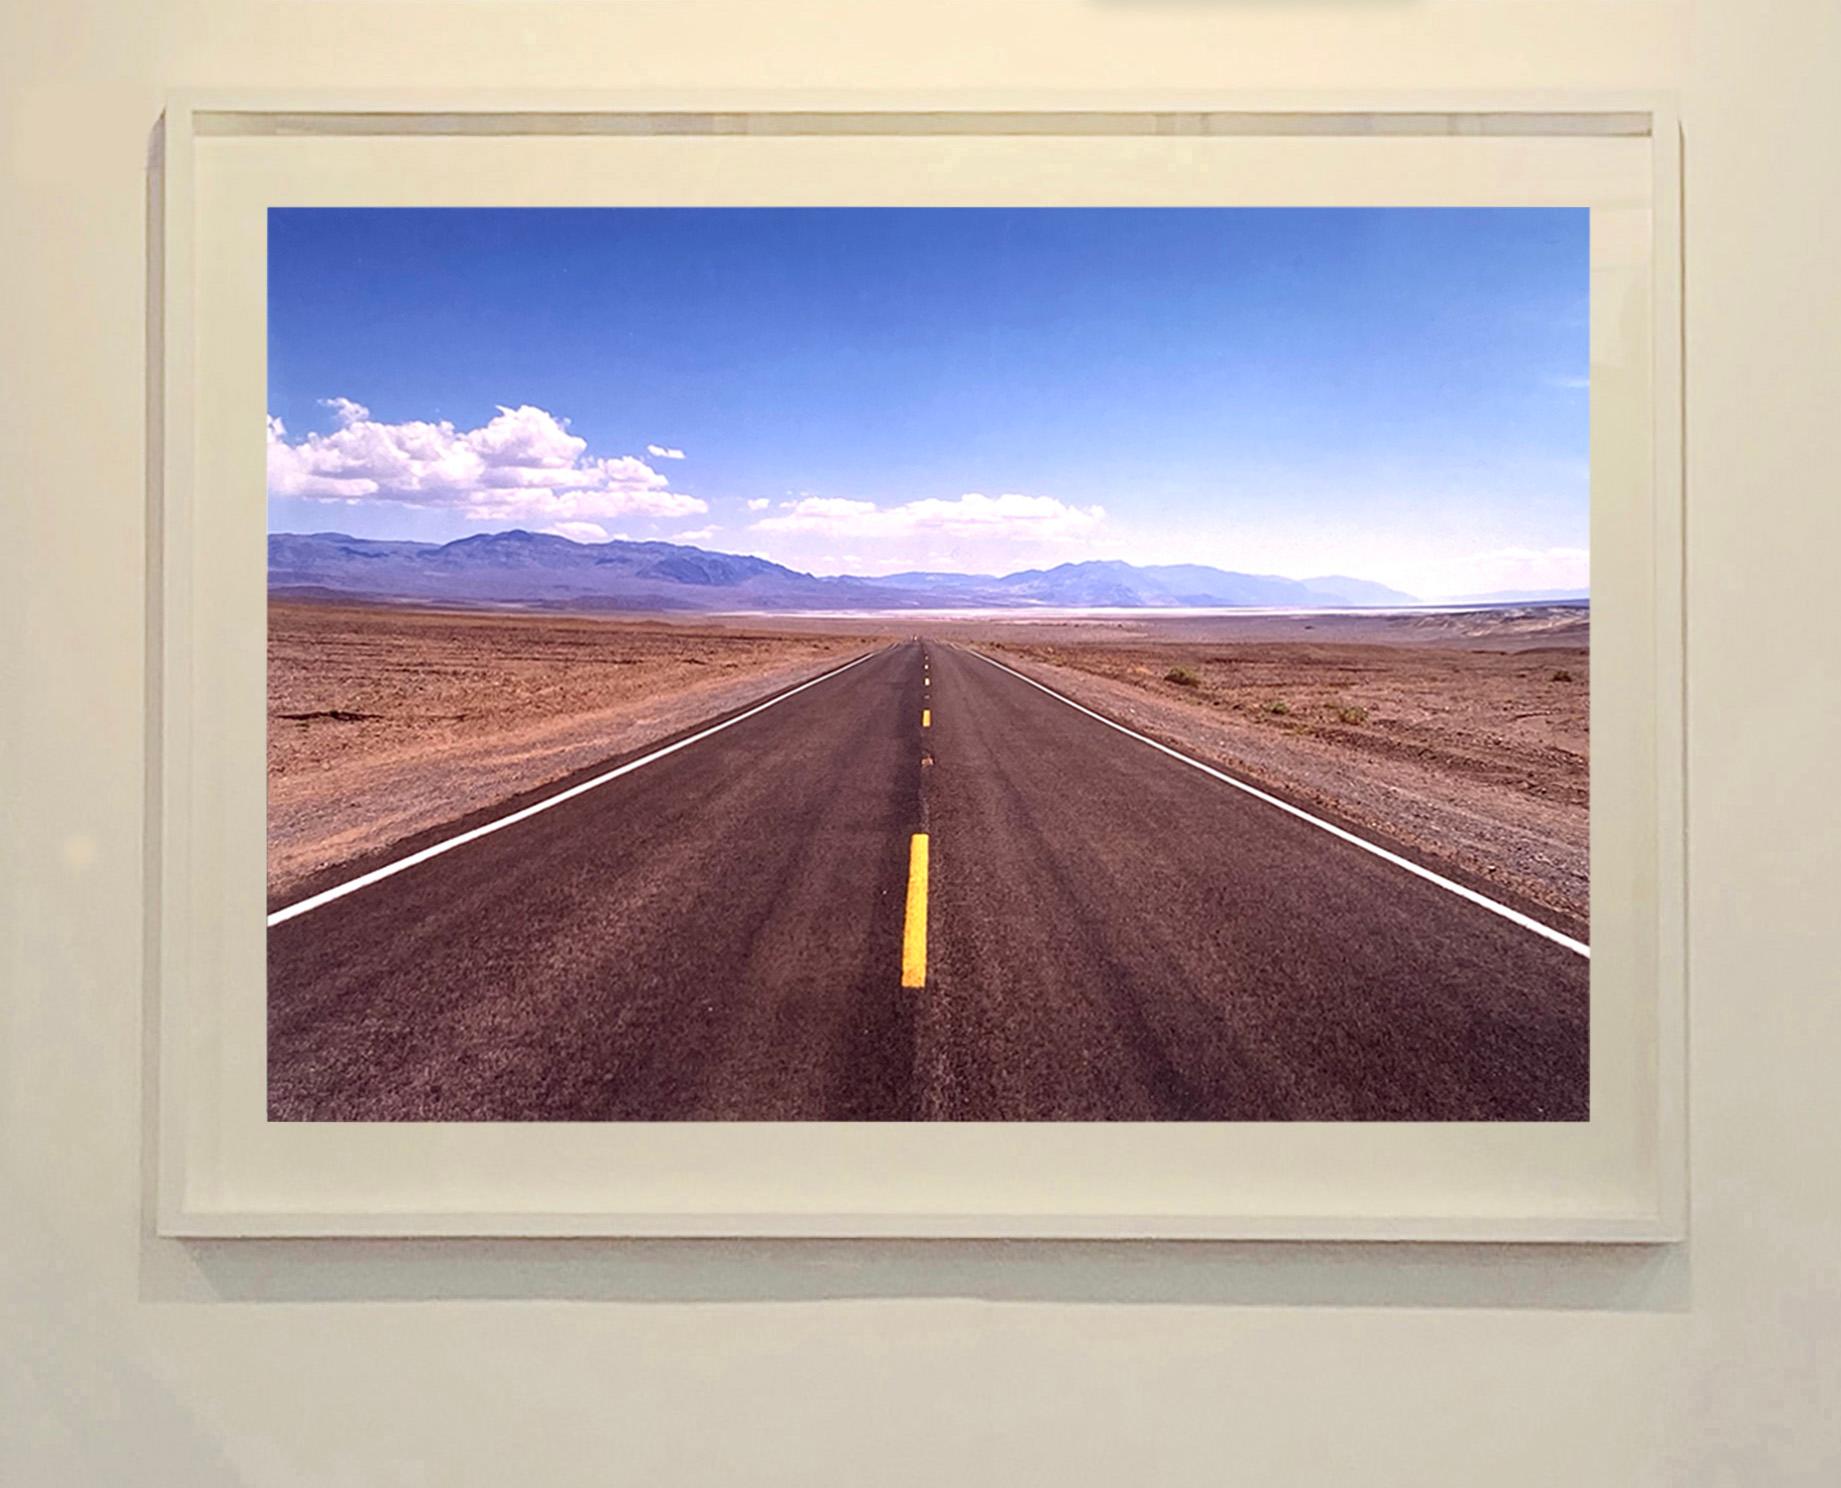 The Road to Death Valley, Mojave Desert, California - Landscape Color Photo - Pop Art Print by Richard Heeps